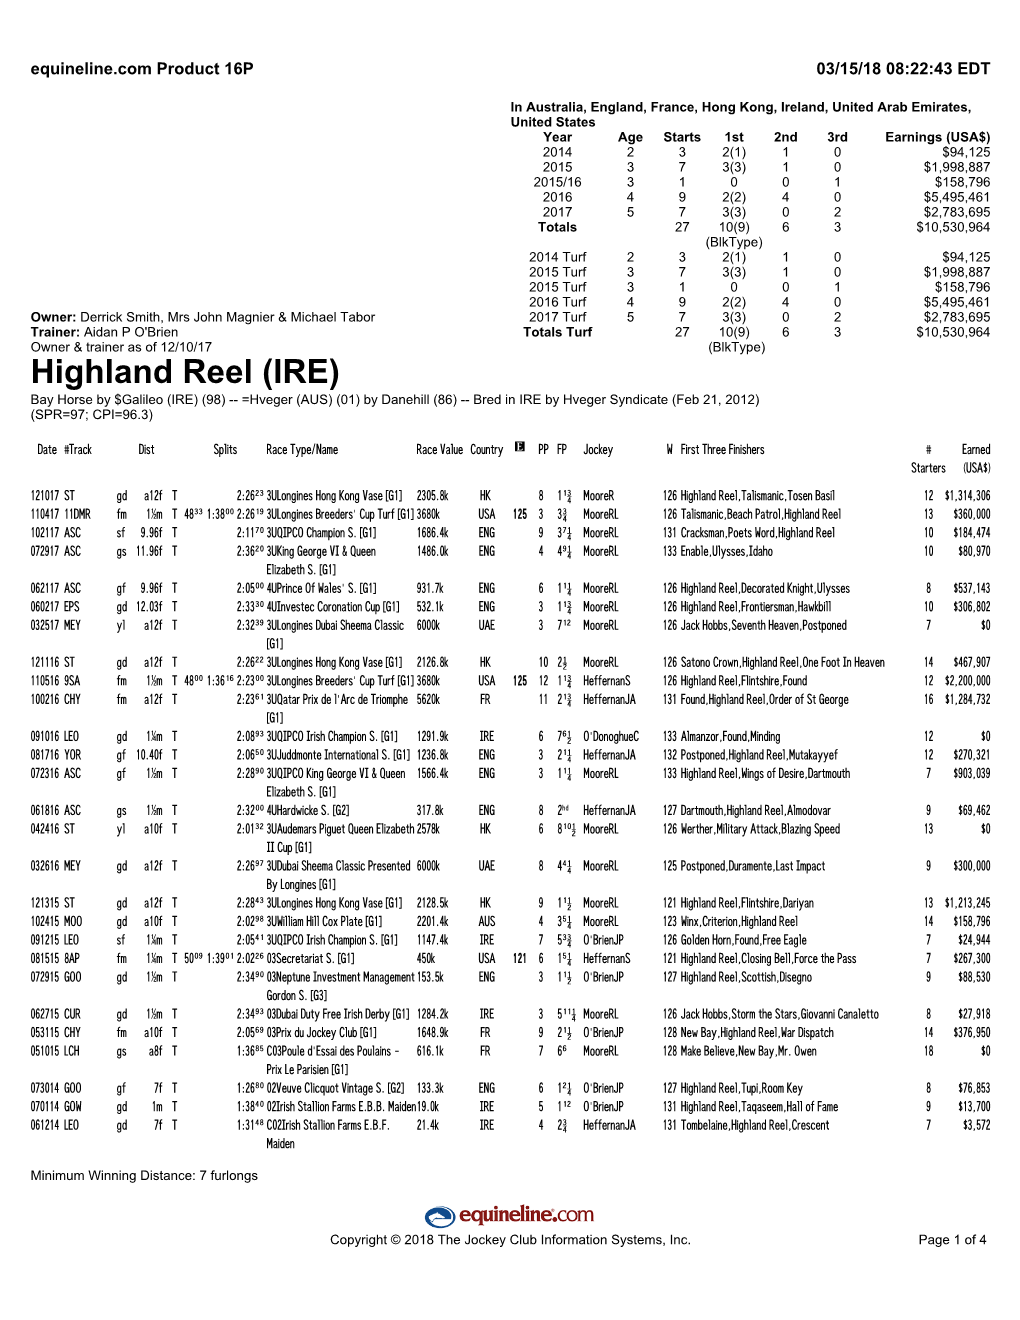 Highland Reel (IRE) Bay Horse by $Galileo (IRE) (98) -- =Hveger (AUS) (01) by Danehill (86) -- Bred in IRE by Hveger Syndicate (Feb 21, 2012) (SPR=97; CPI=96.3)